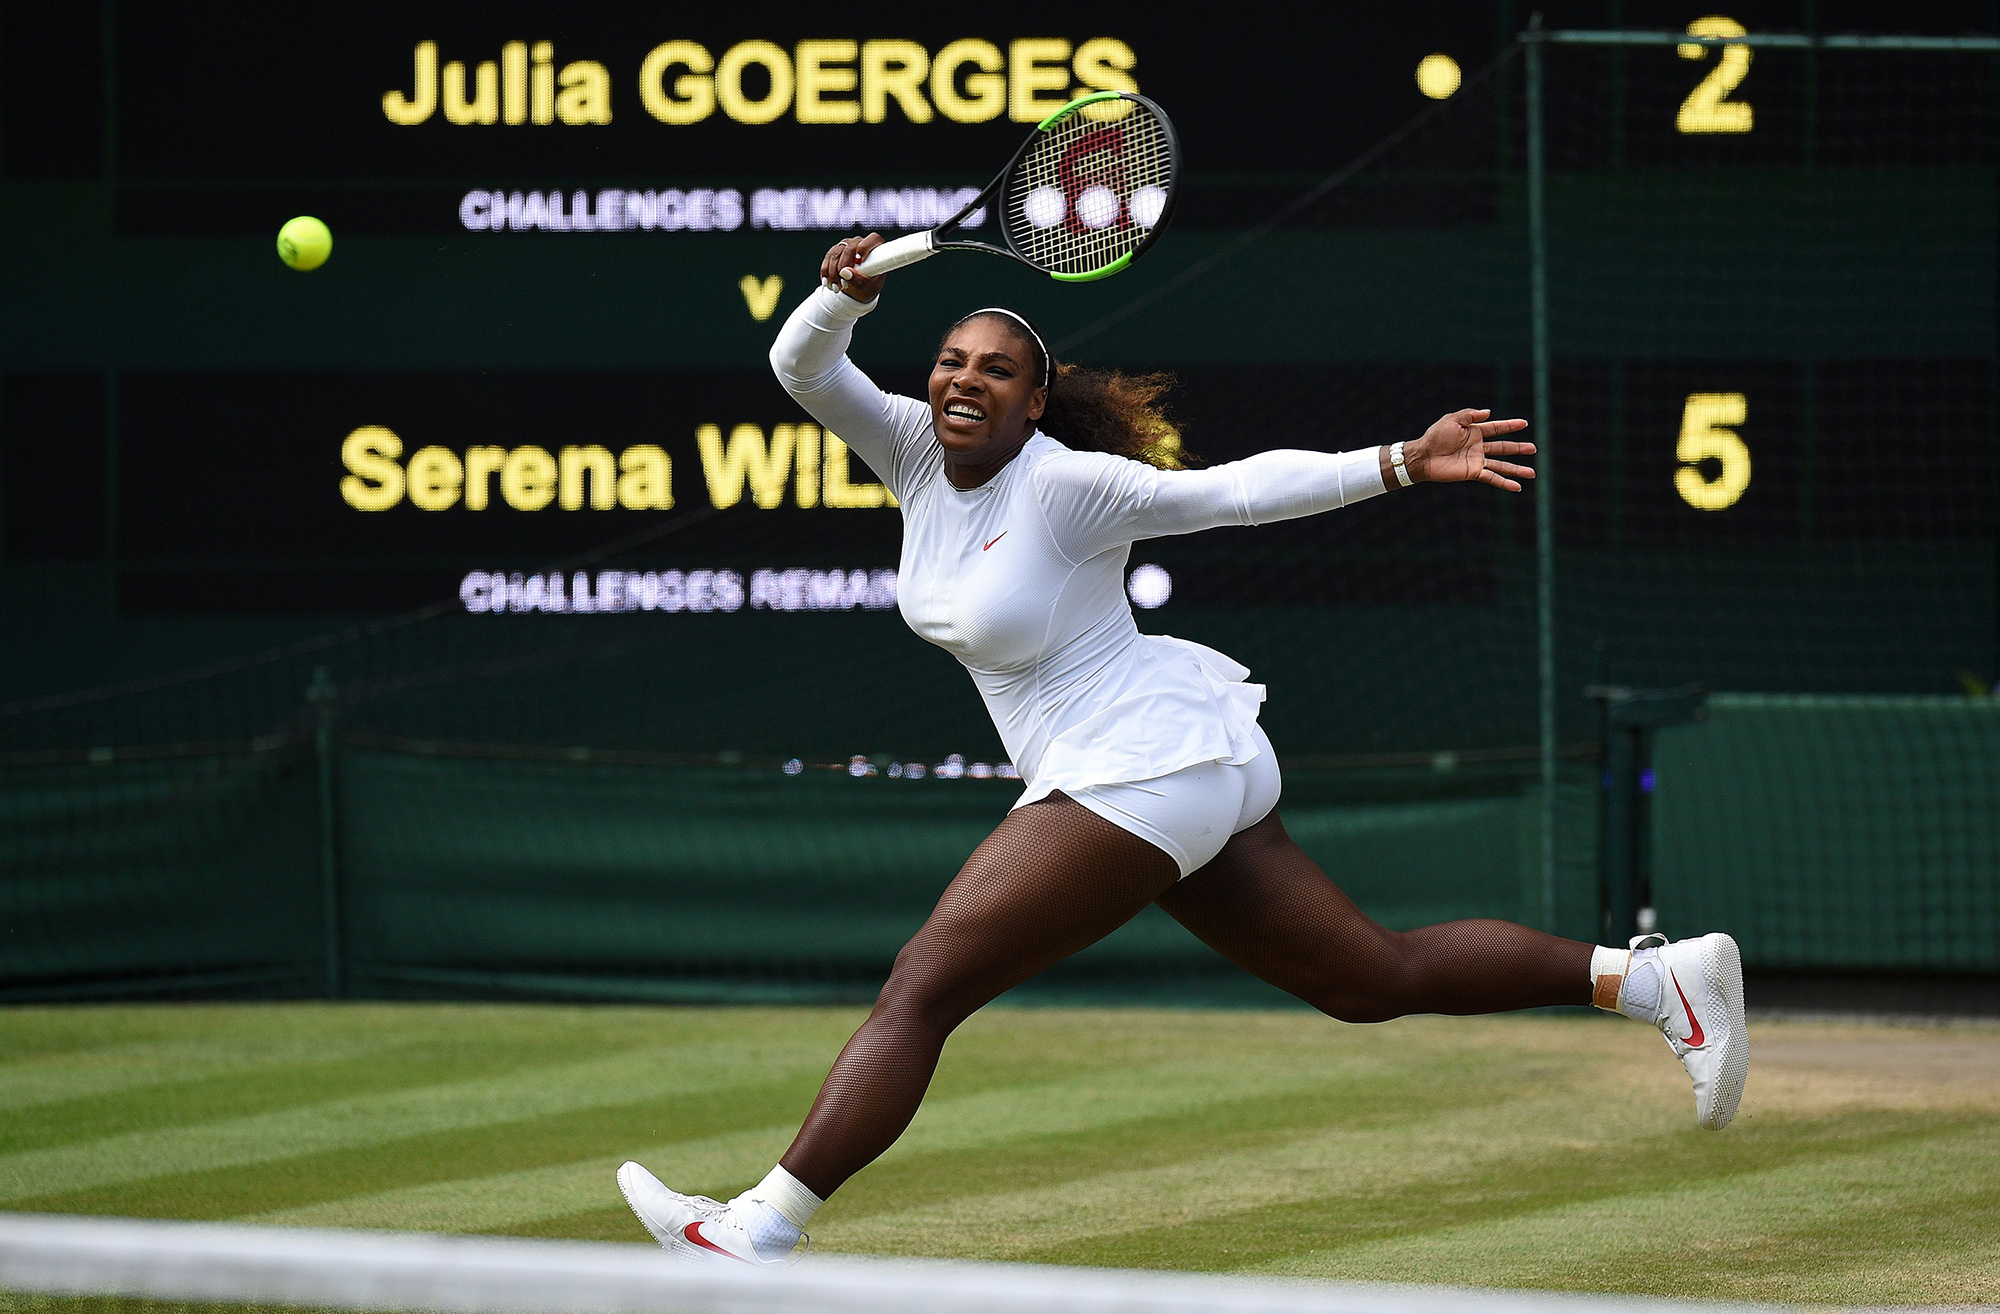 Serena Williams says she will compete at Wimbledon this year : NPR